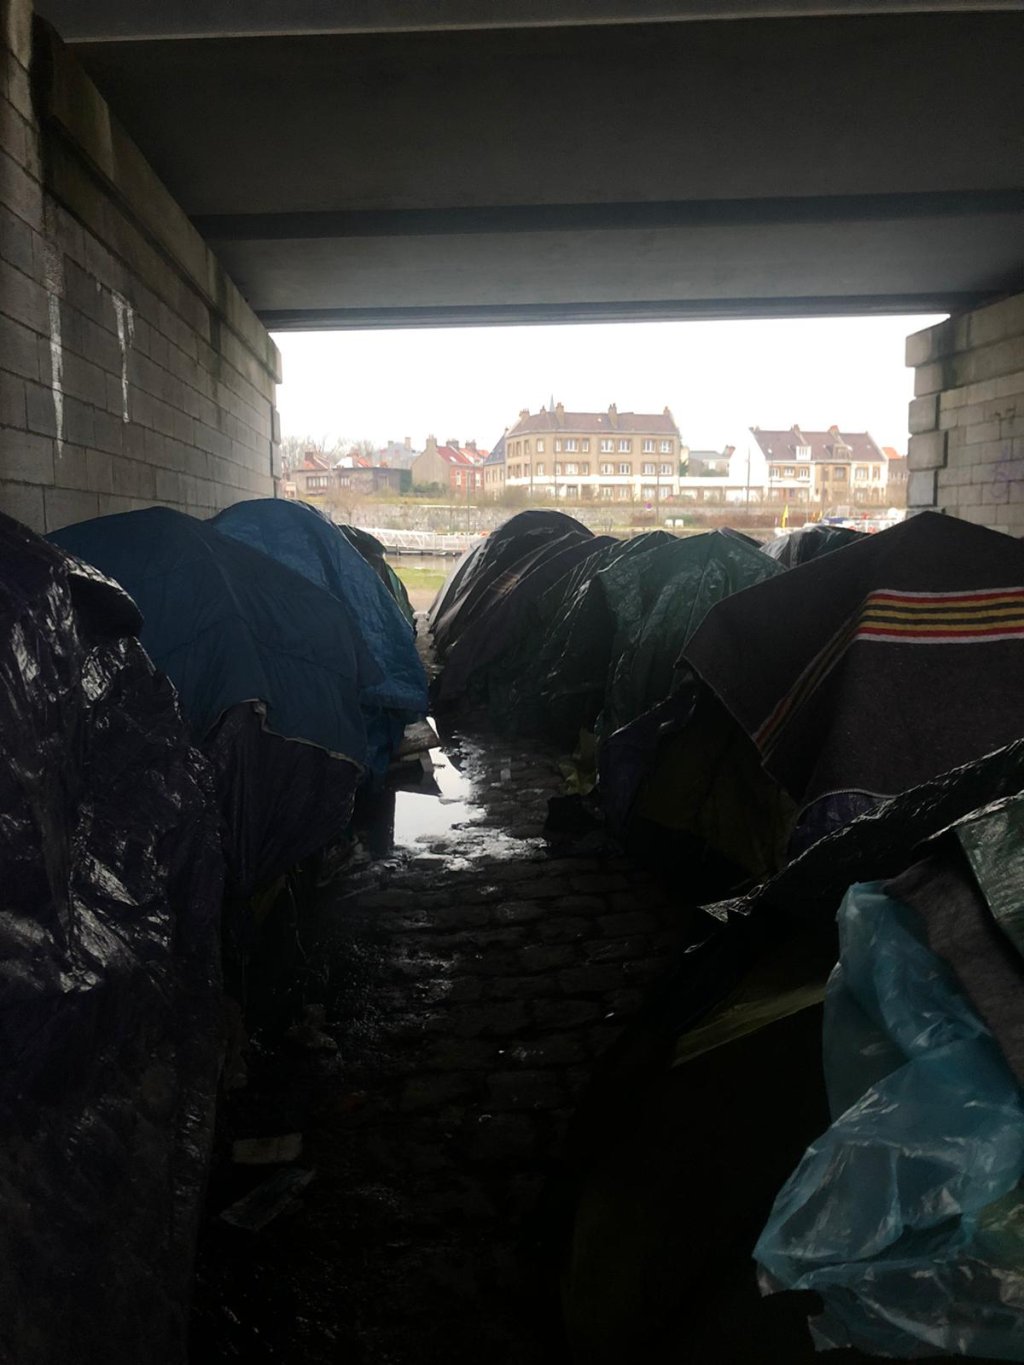 Sheltering under a bridge in Calais in winter conditions | Photo copyright: Care4Calais, January 2021